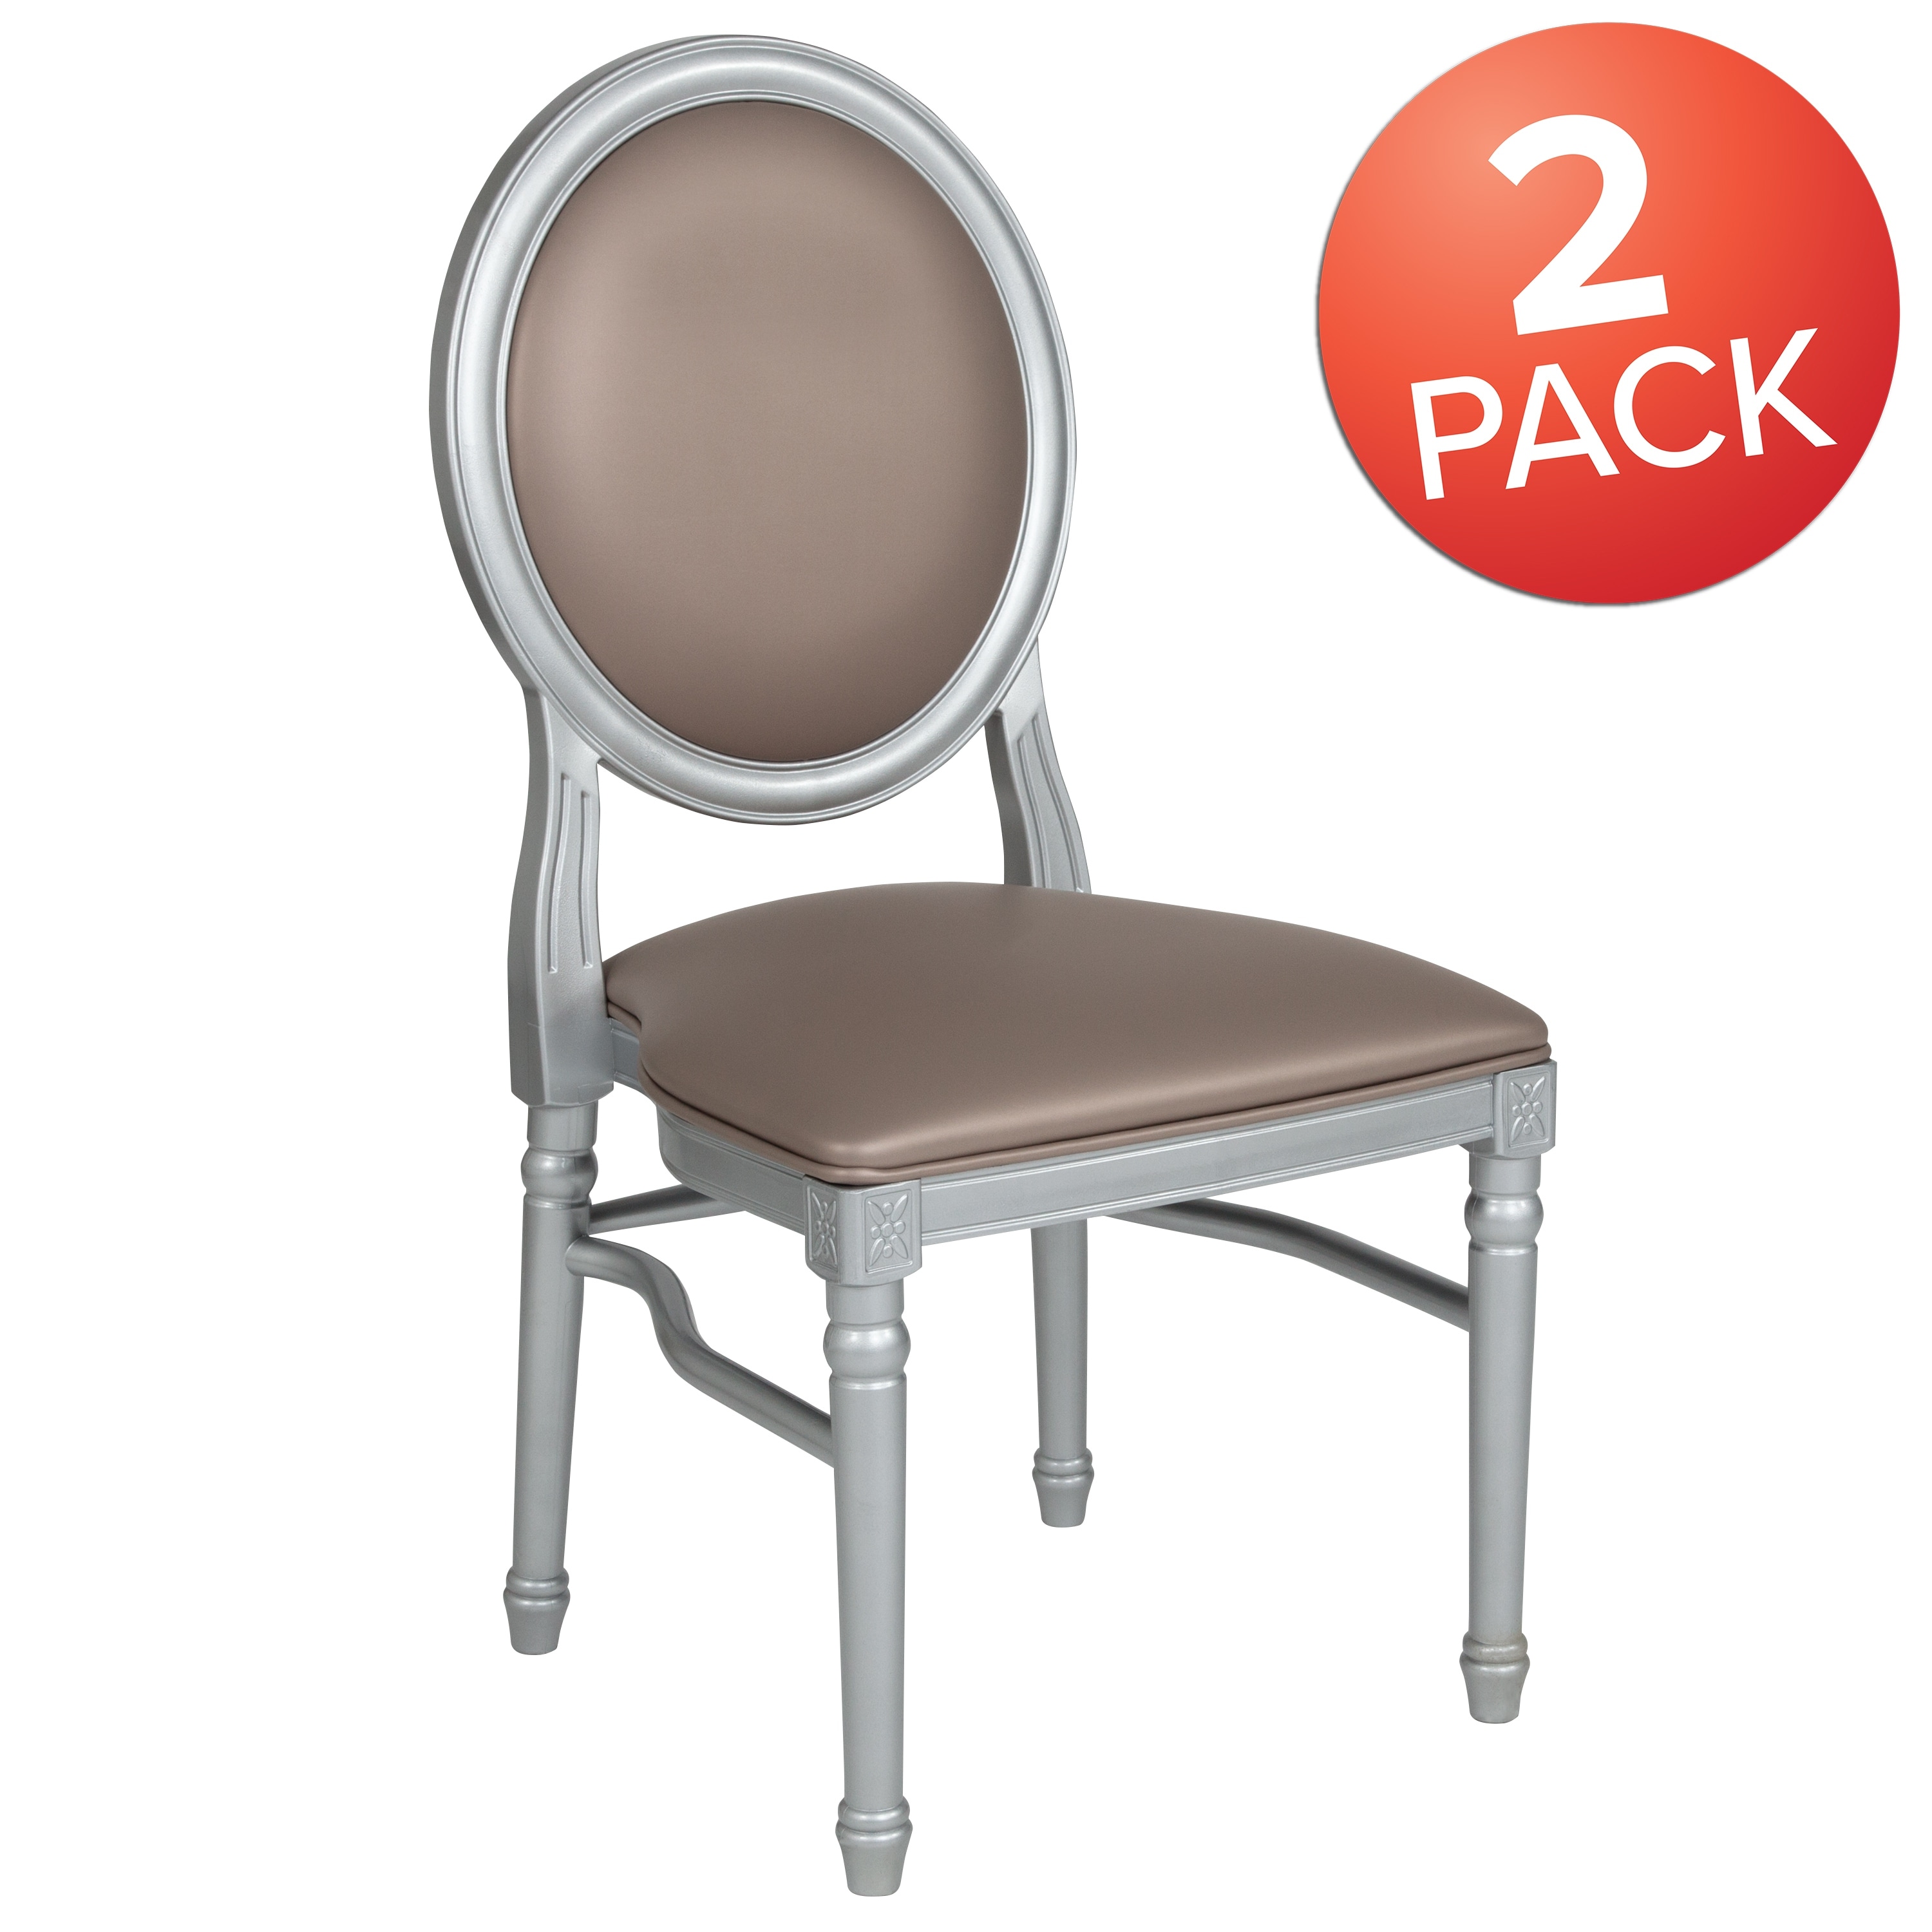 Giddens Linen King Louis Back Side Chair (Set of 2) Ophelia & Co. Upholstery Color: Floral